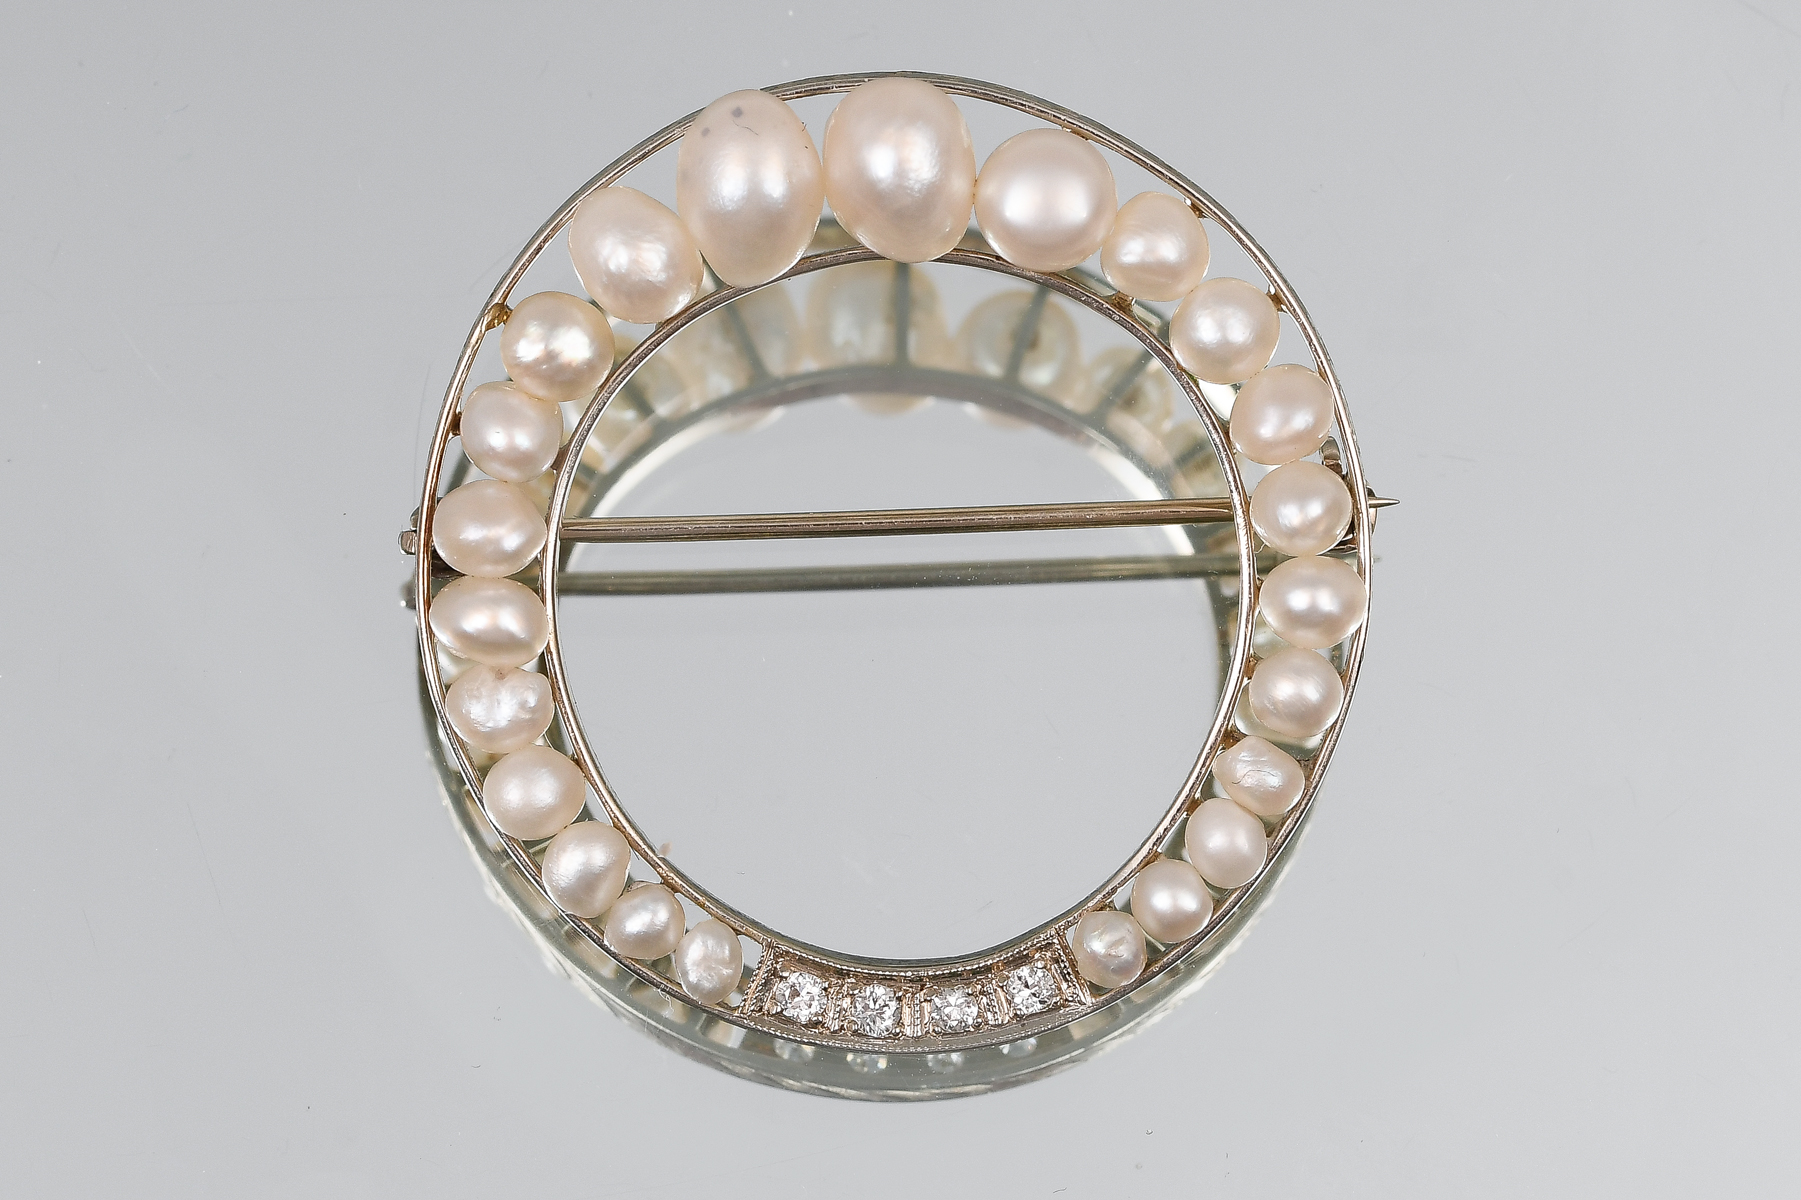 GOLD, DIAMOND AND PEARL BROOCH: